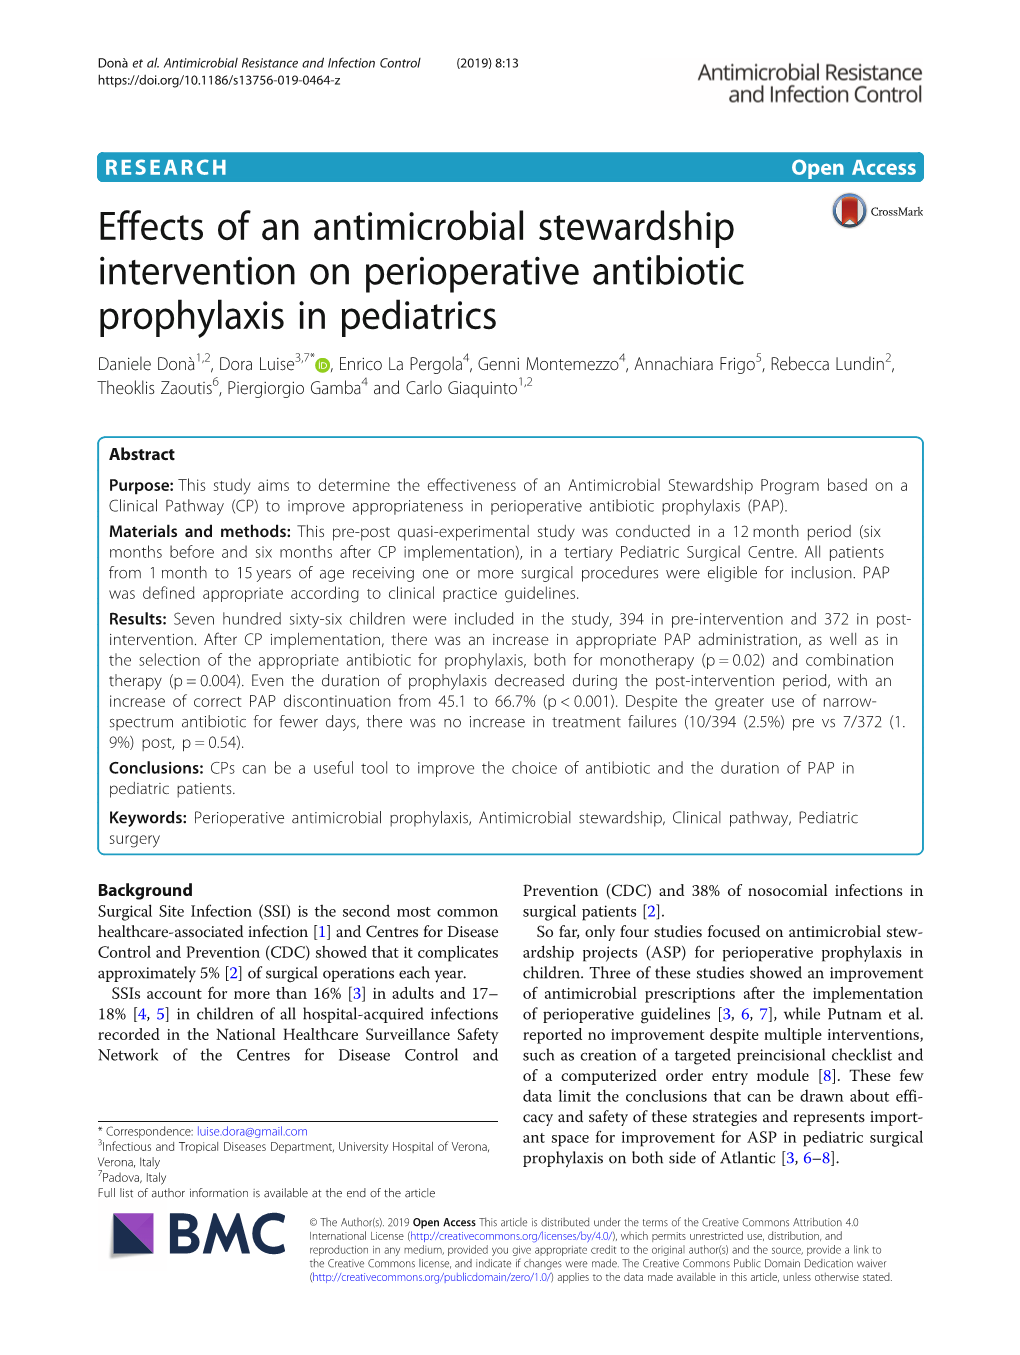 Effects of an Antimicrobial Stewardship Intervention on Perioperative Antibiotic Prophylaxis in Pediatrics